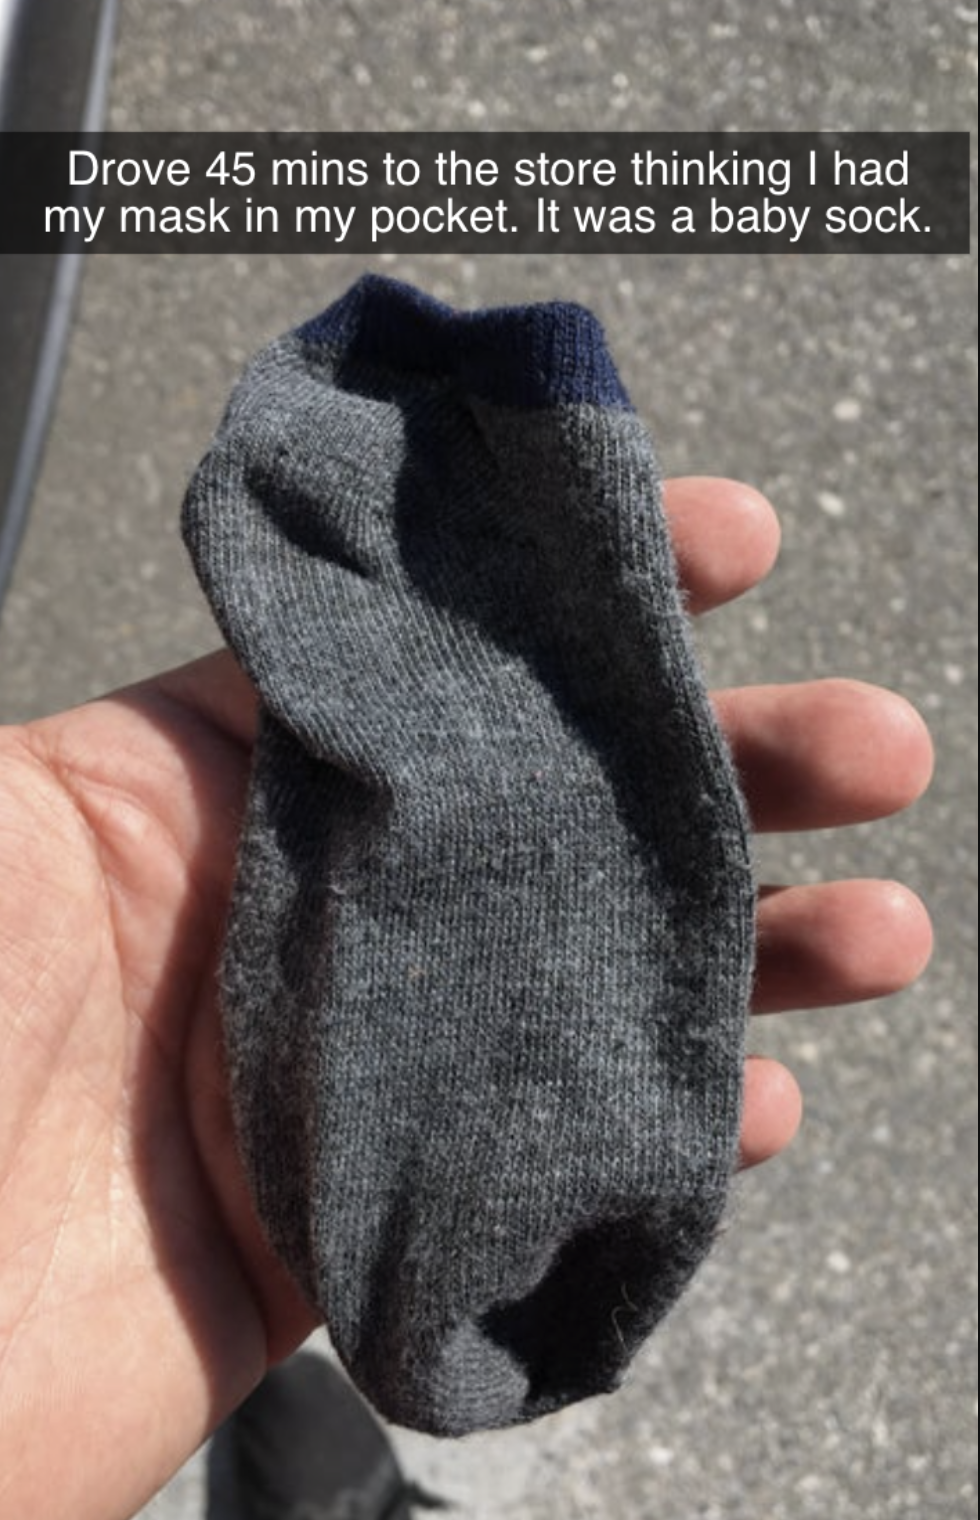 person who accidentally brought a baby sock to the store instead of a mask